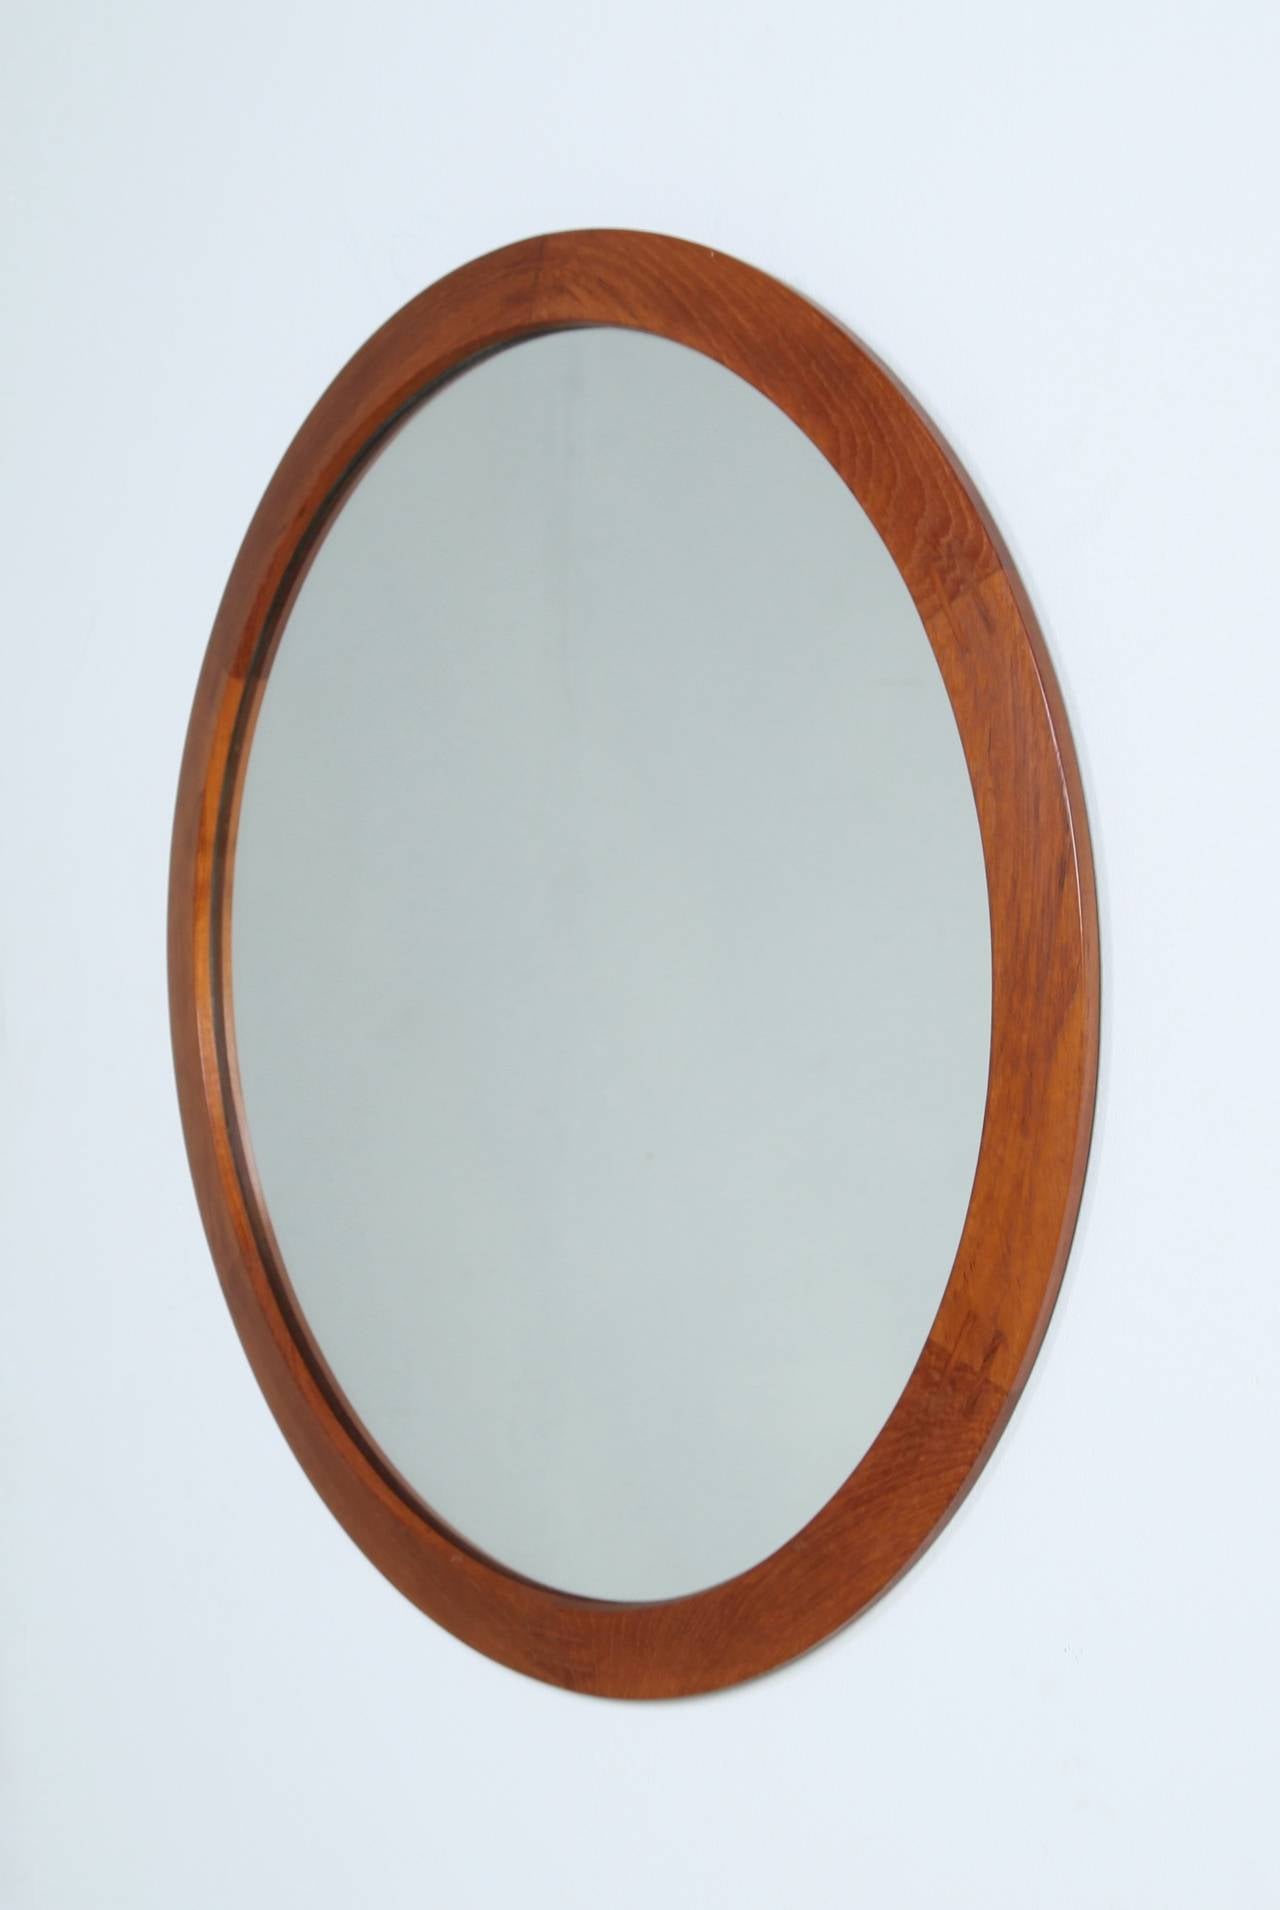 A round teak mirror by Danish designer Aksel Kjersgaard for Odder furniture. In perfect condition and marked by Kjersgaard.